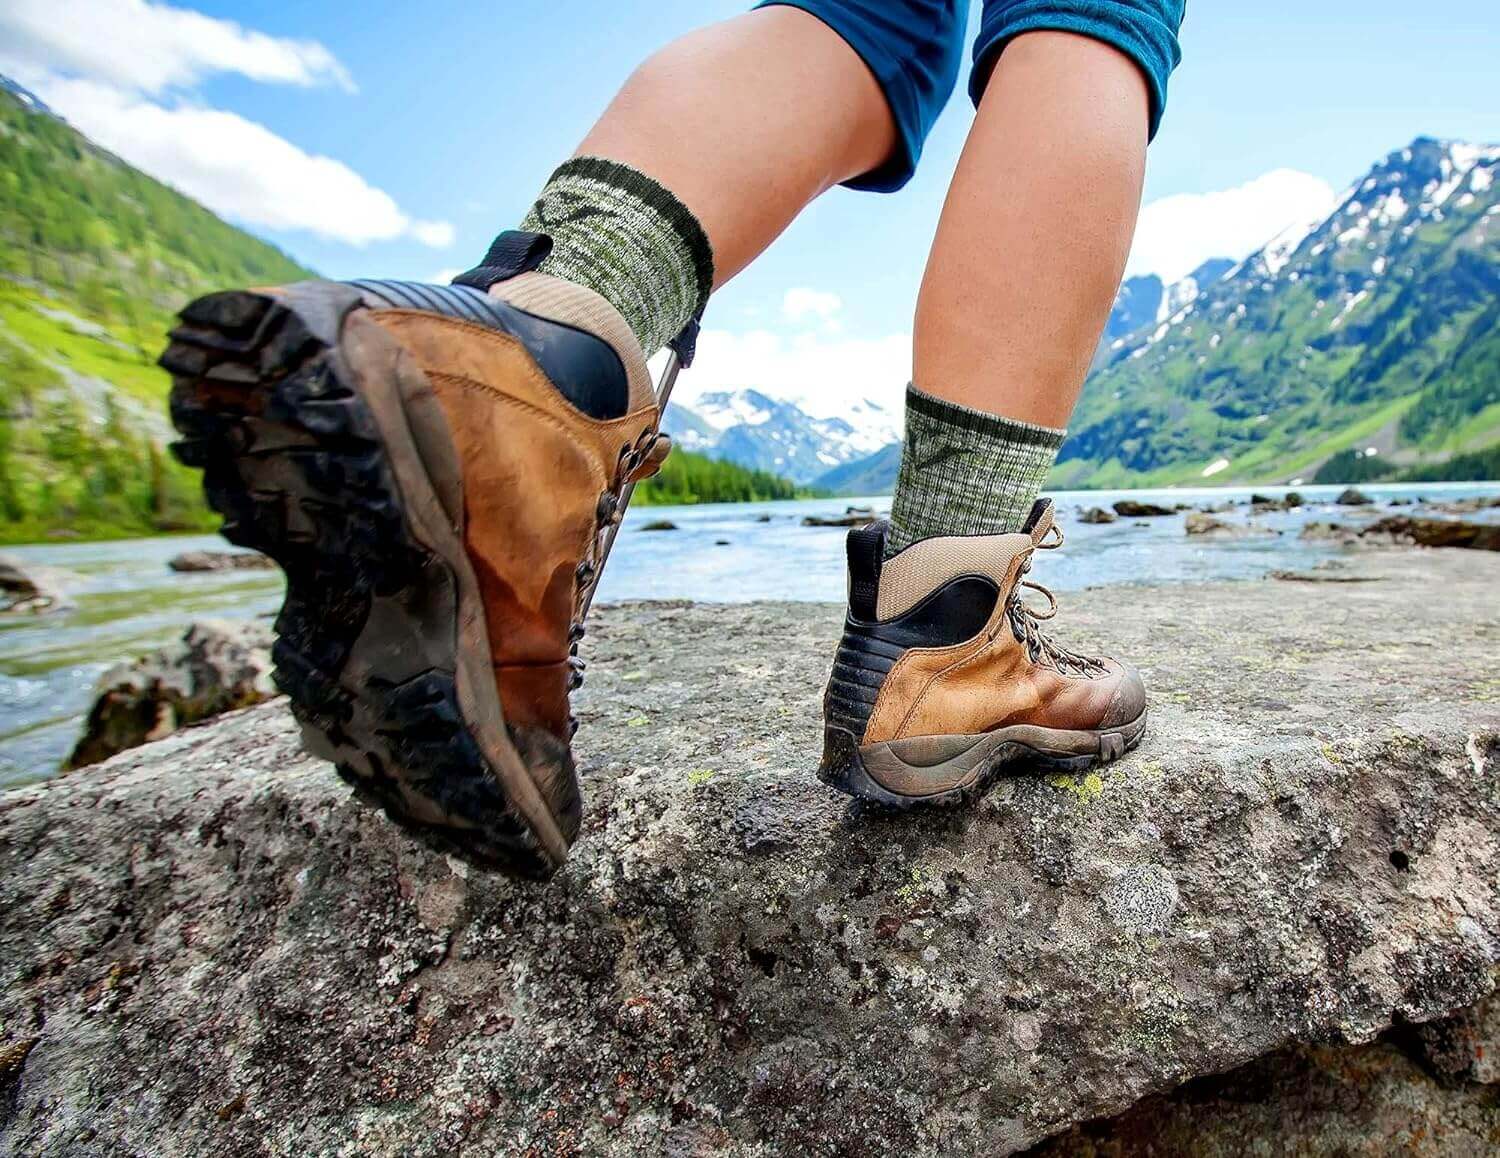 Shop The Latest >Women's Hiking Walking Socks, Multi-pack Outdoor Recreation > *Only $25.64*> From The Top Brand > *FEIDEERl* > Shop Now and Get Free Shipping On Orders Over $45.00 >*Shop Earth Foot*